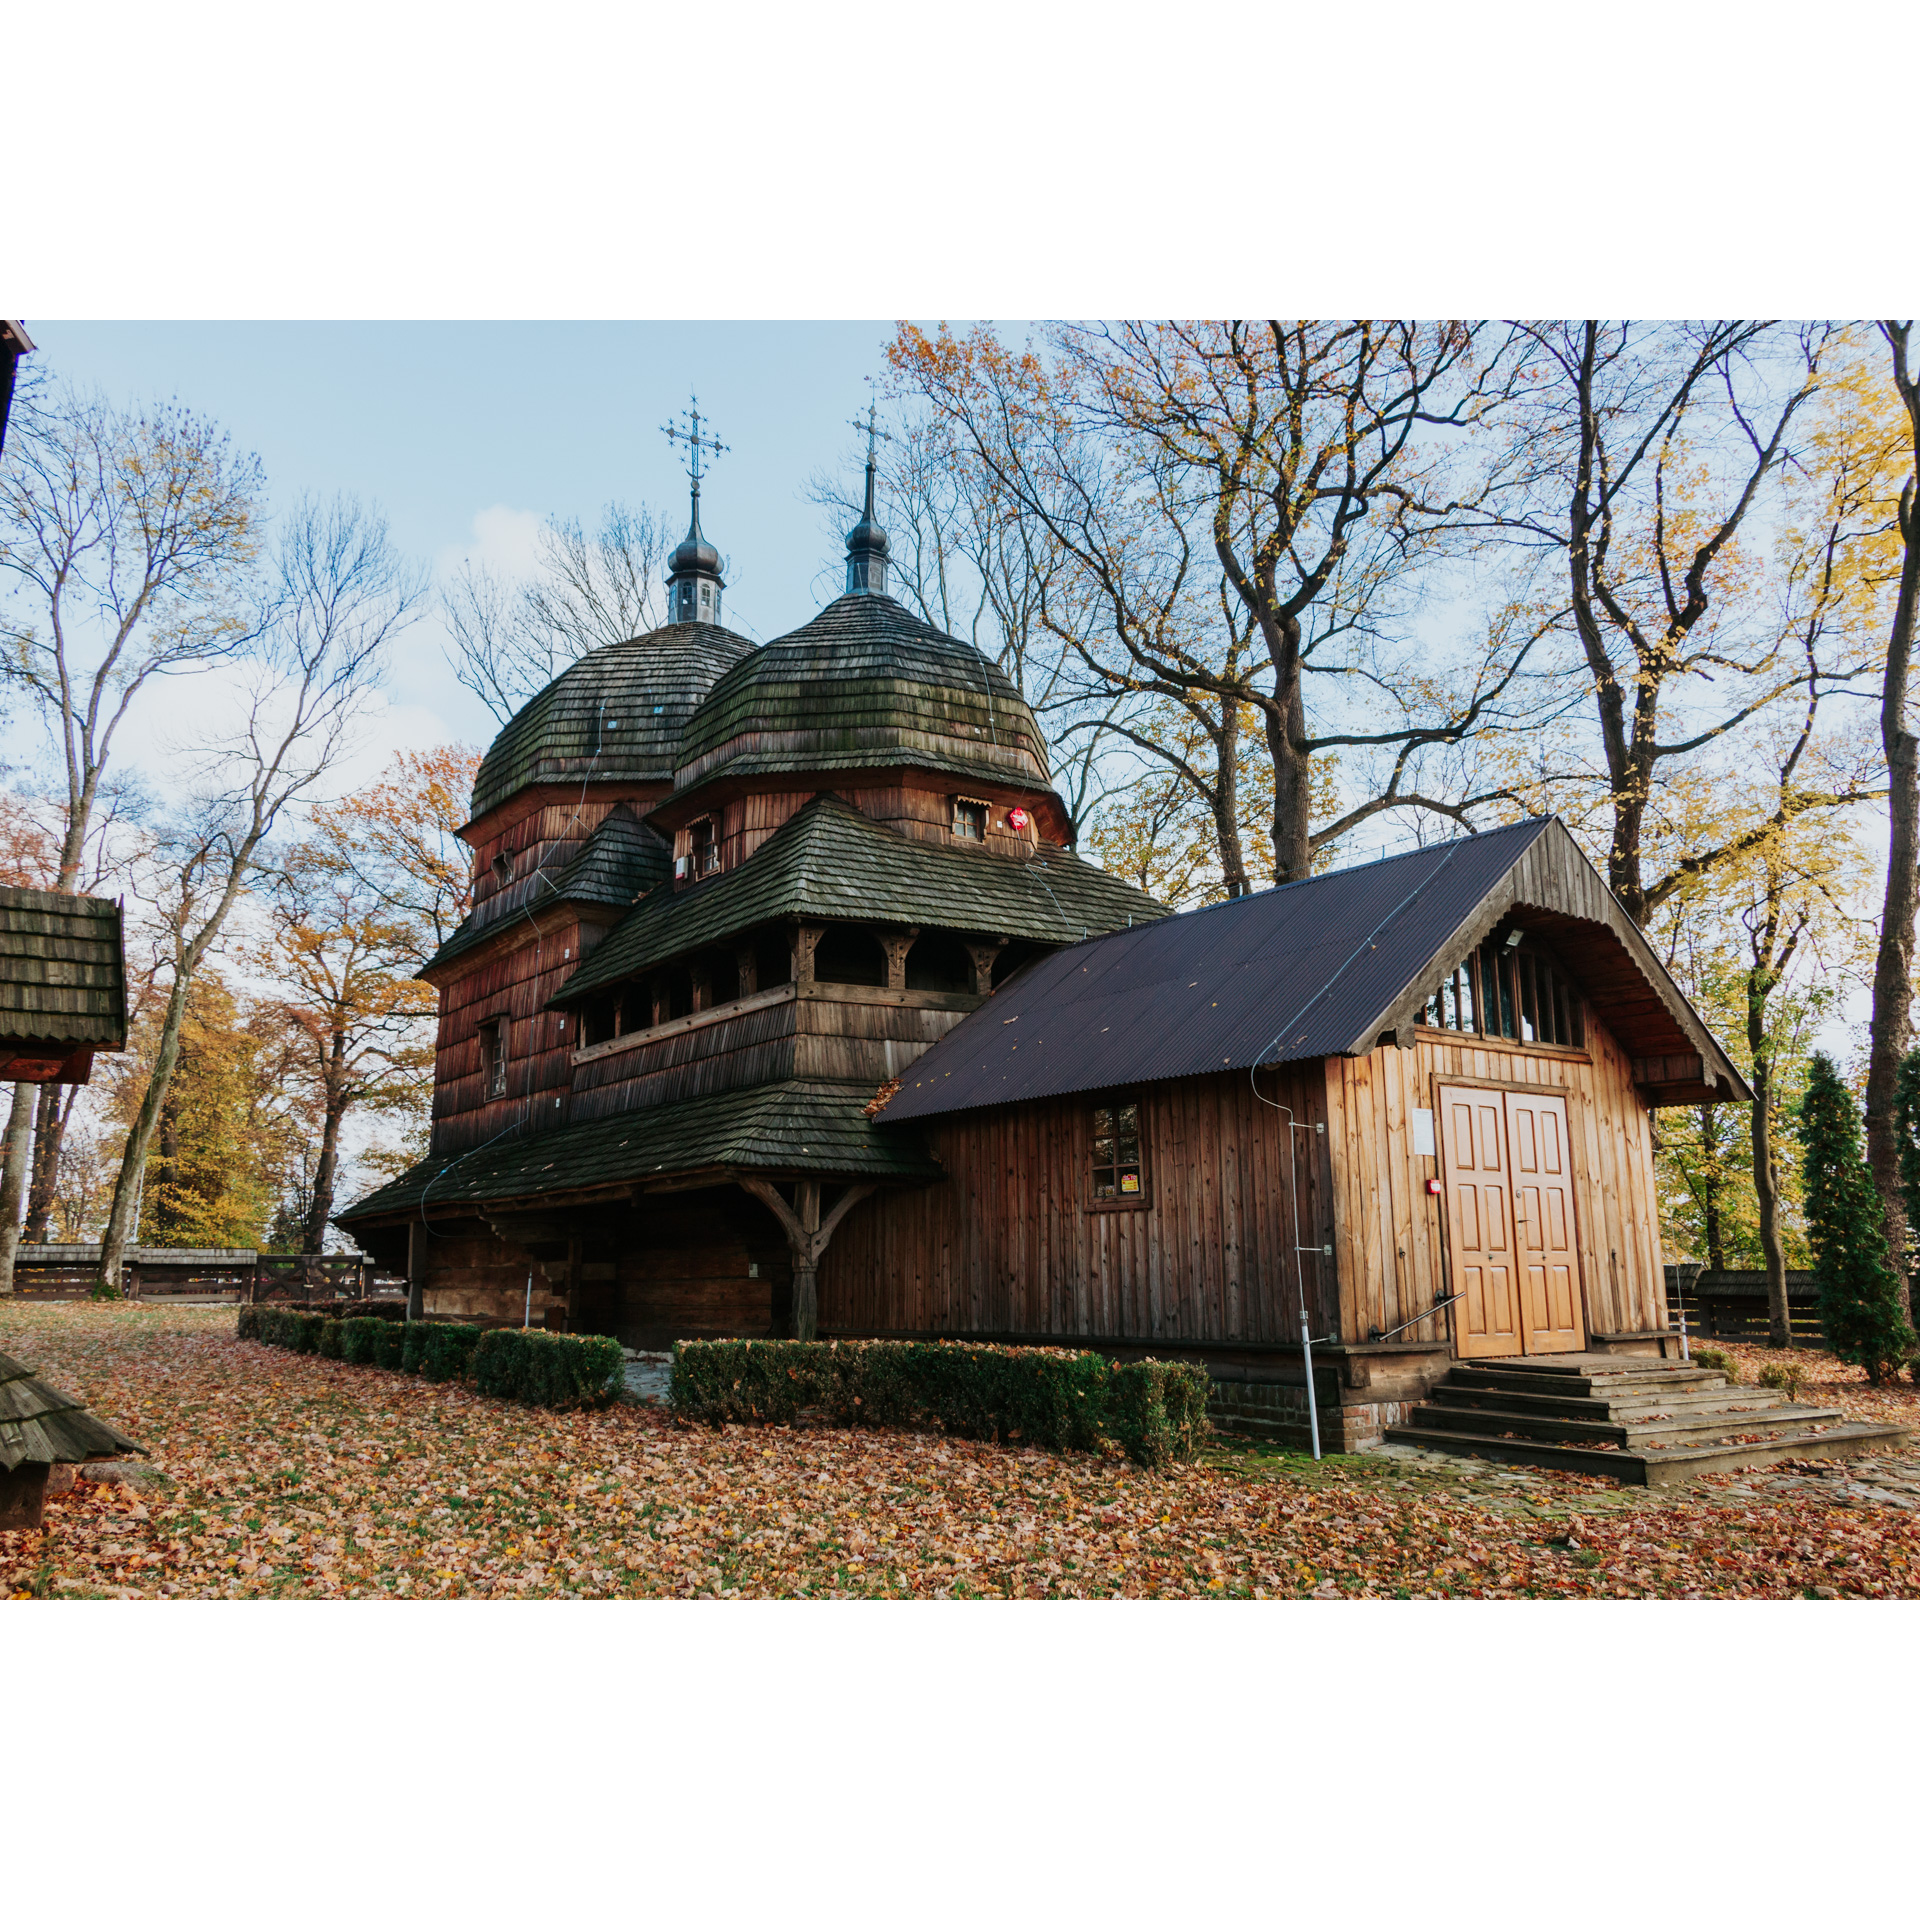 A wooden, old Orthodox church with a long, renovated vestibule among autumn trees